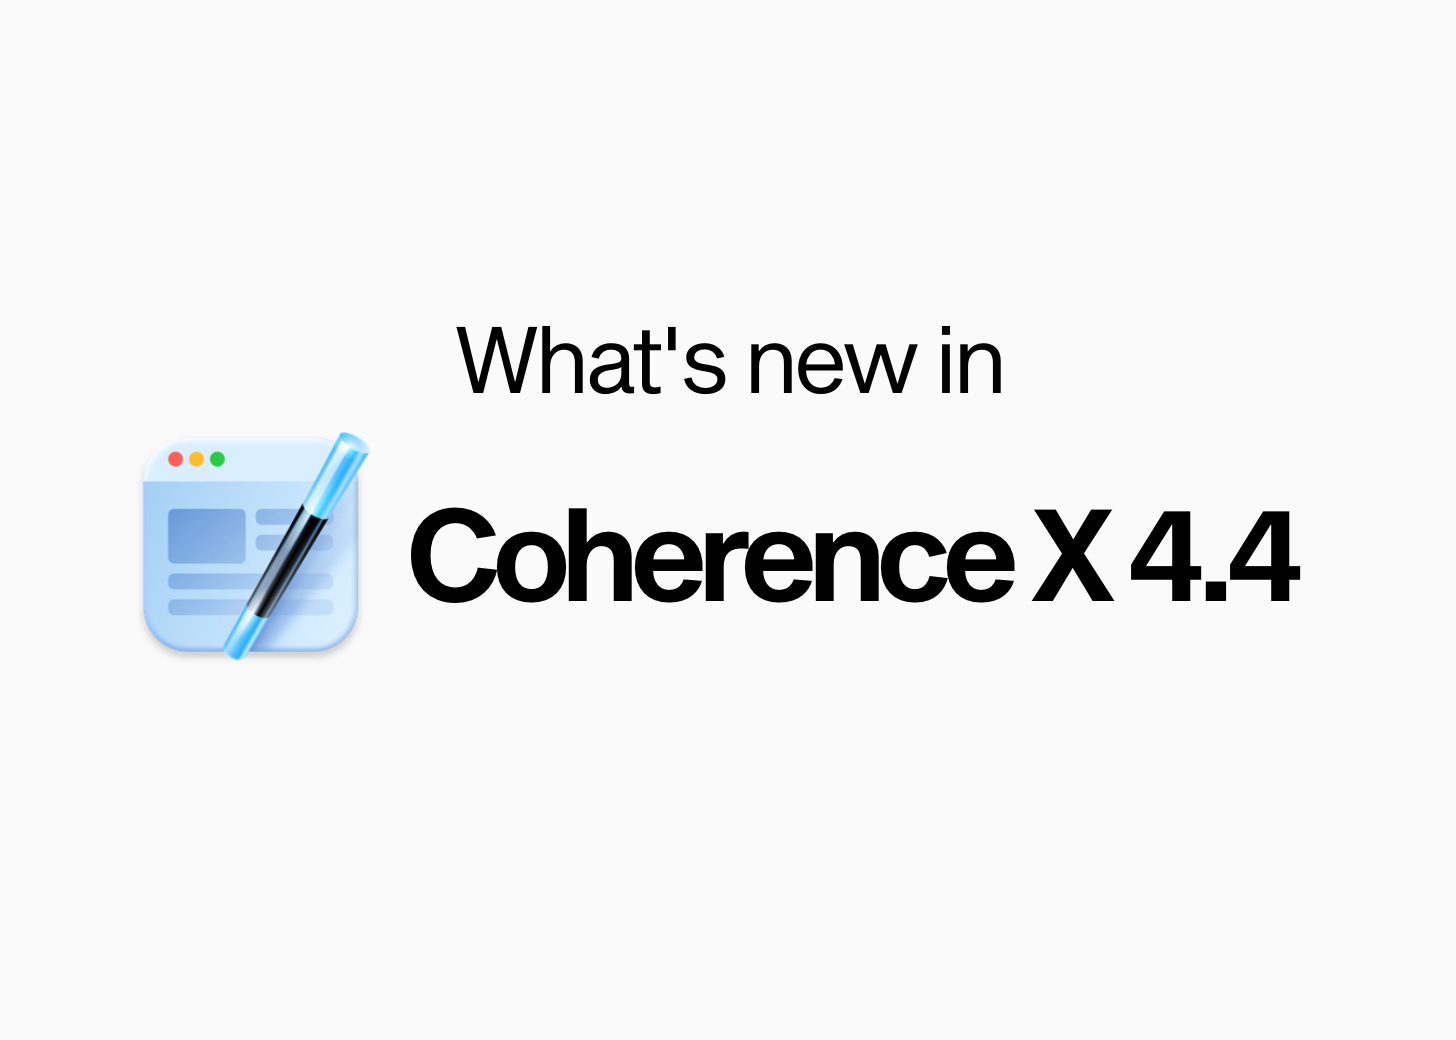 What's new in Coherence X 4.4